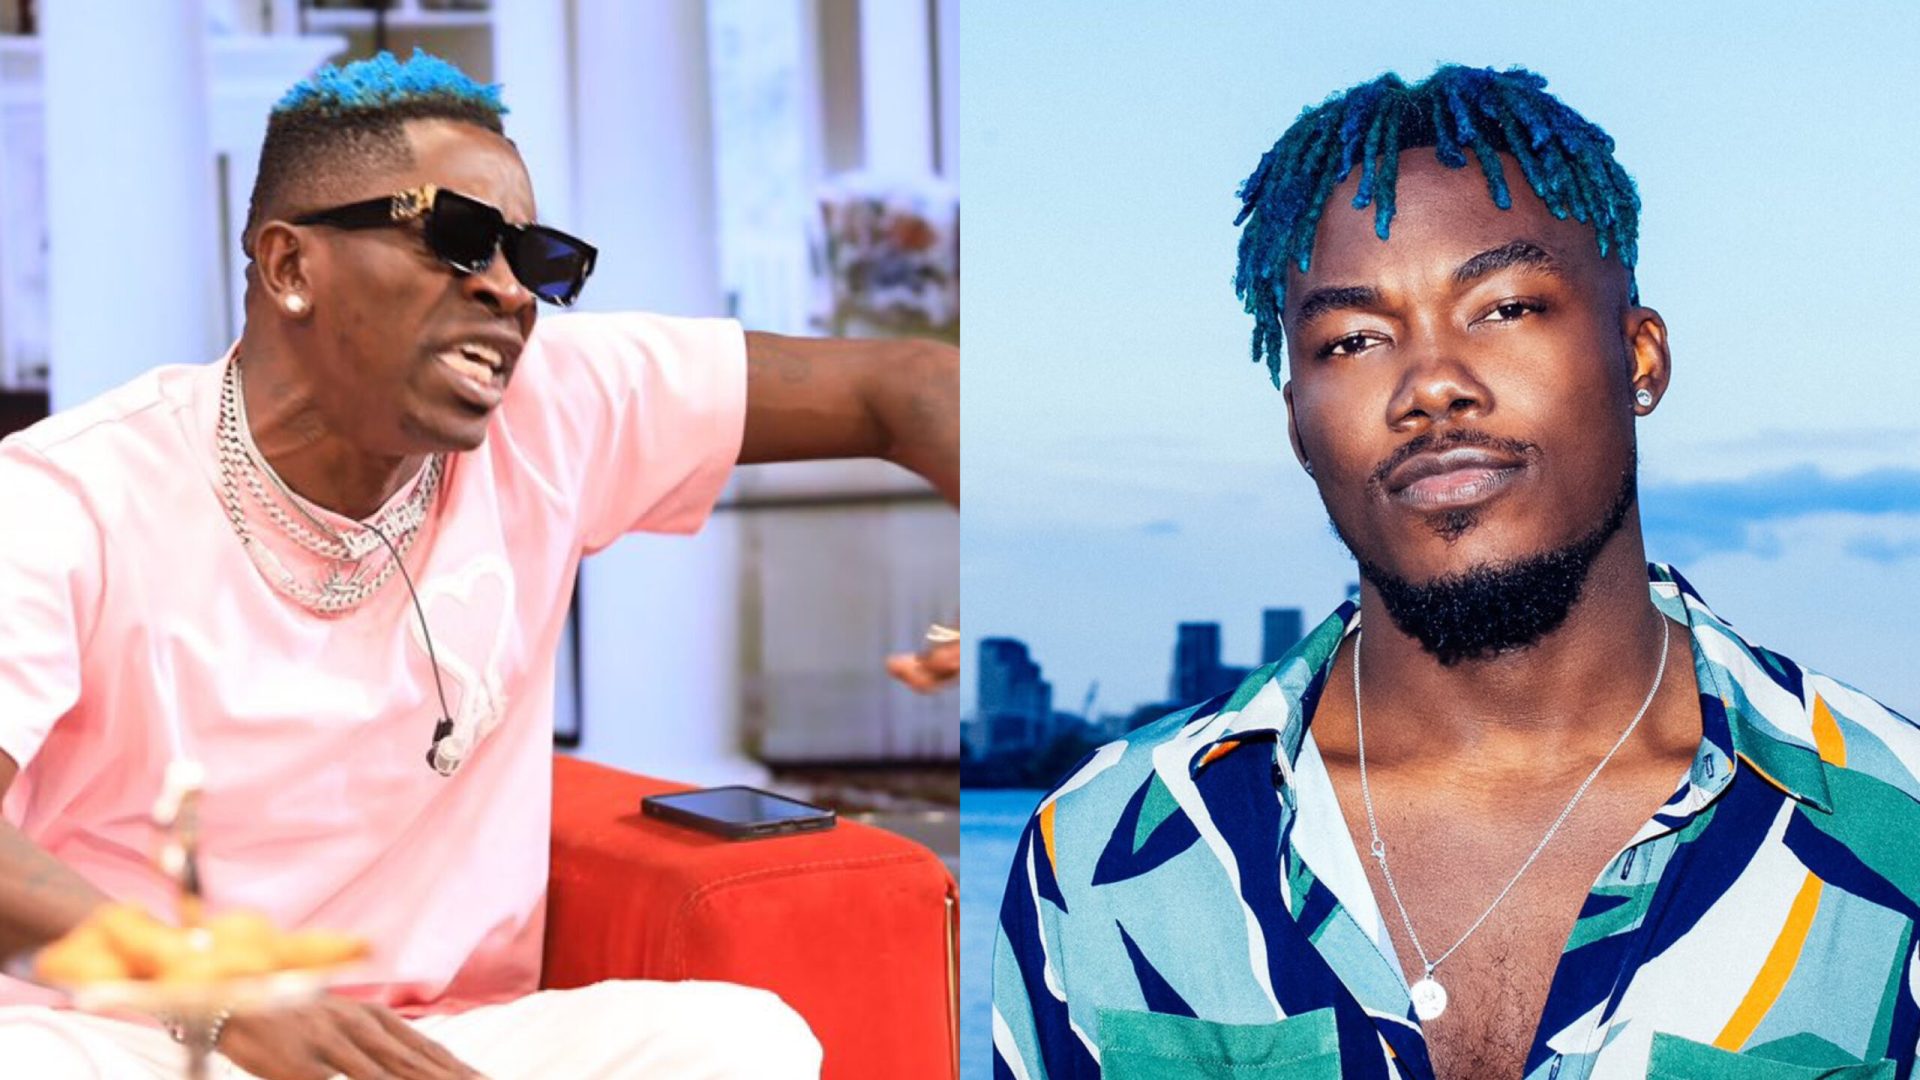 "Shatta Wale speaks and dresses anyhow, the reason the industry does not attract investors" – Camidoh